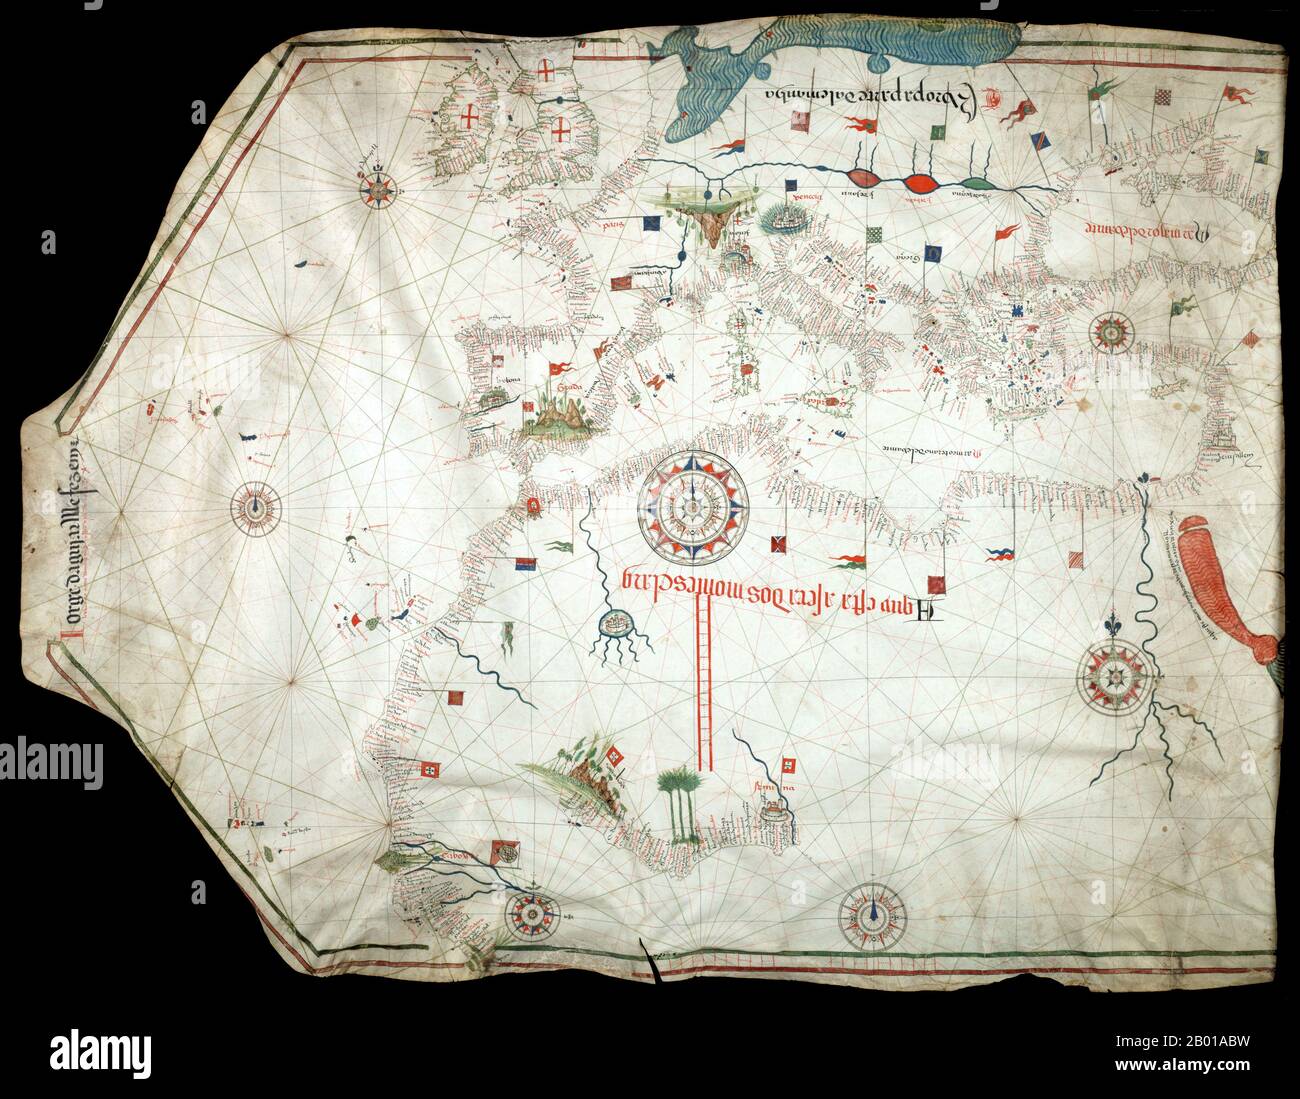 Portugal: Jorge de Aguiar's chart of the Mediterranean, Western Europe and African Coast, 1492.  A portolan chart from 1492, the oldest known signed and dated chart of Portuguese origin. Cartography technologies greatly advanced during the Age of Discovery. Iberian mapmakers in particular focused on practical charts to use as navigational aids.  Unlike Spanish maps which were considered a state secret, Portuguese maps were used by other countries, and Portuguese cartographers drew upon the skill and knowledge of other cultures, notably Islamic, as well. Stock Photo